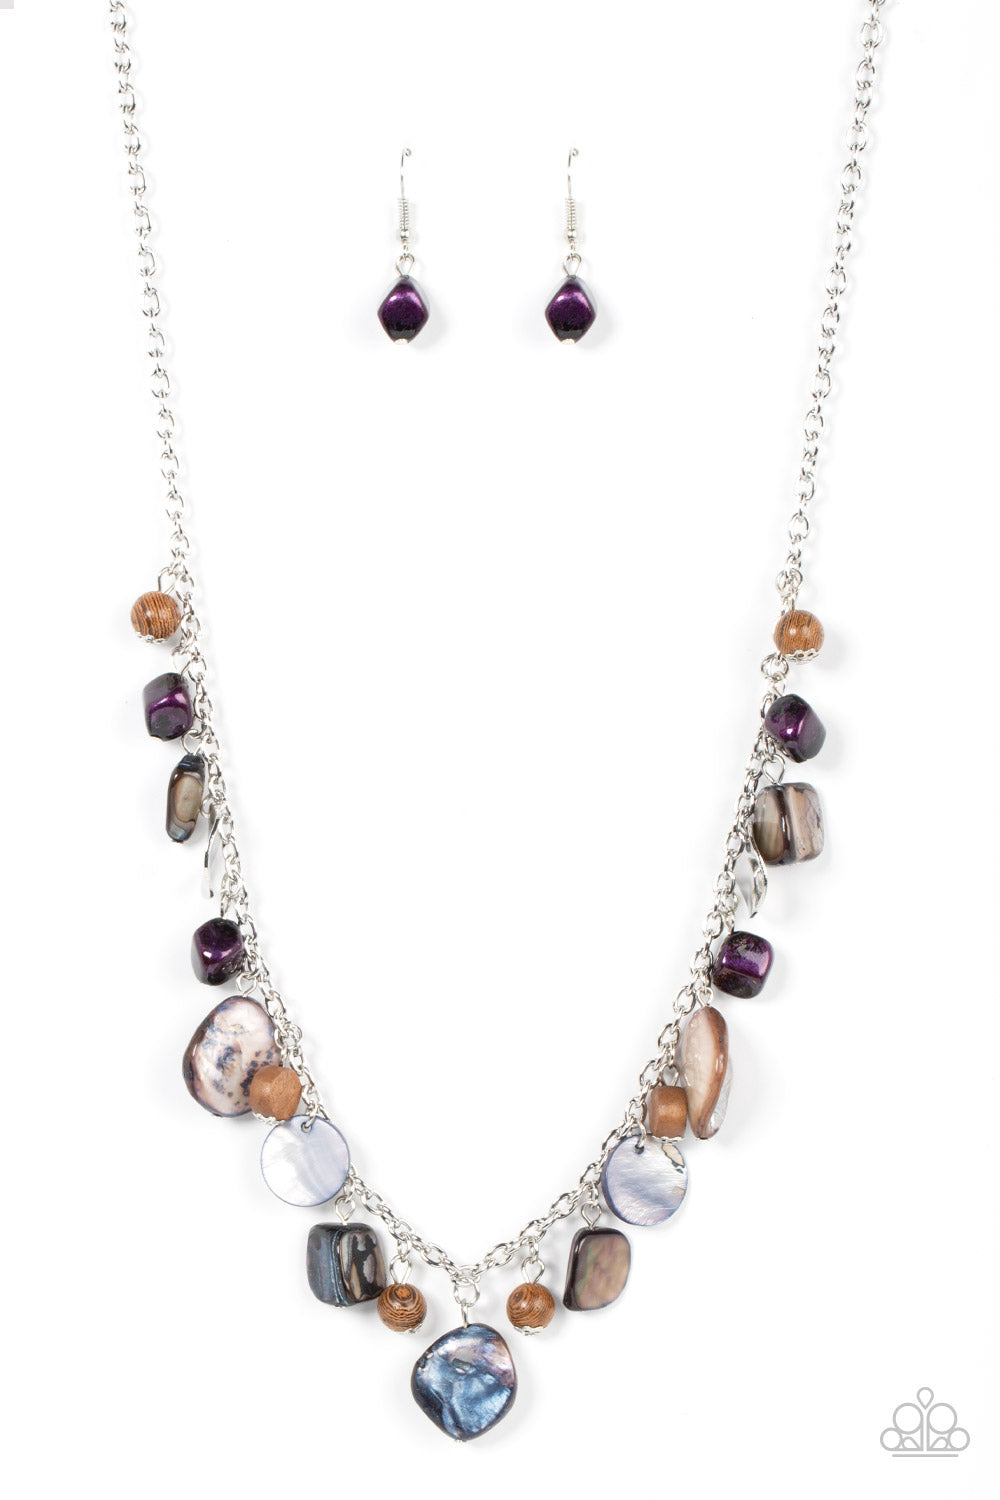 Caribbean Charisma - Purple Iridescent Shell-Like Rocks, Warped Silver Discs, & Brown Wooden Beaded Paparazzi Necklace & matching earrings